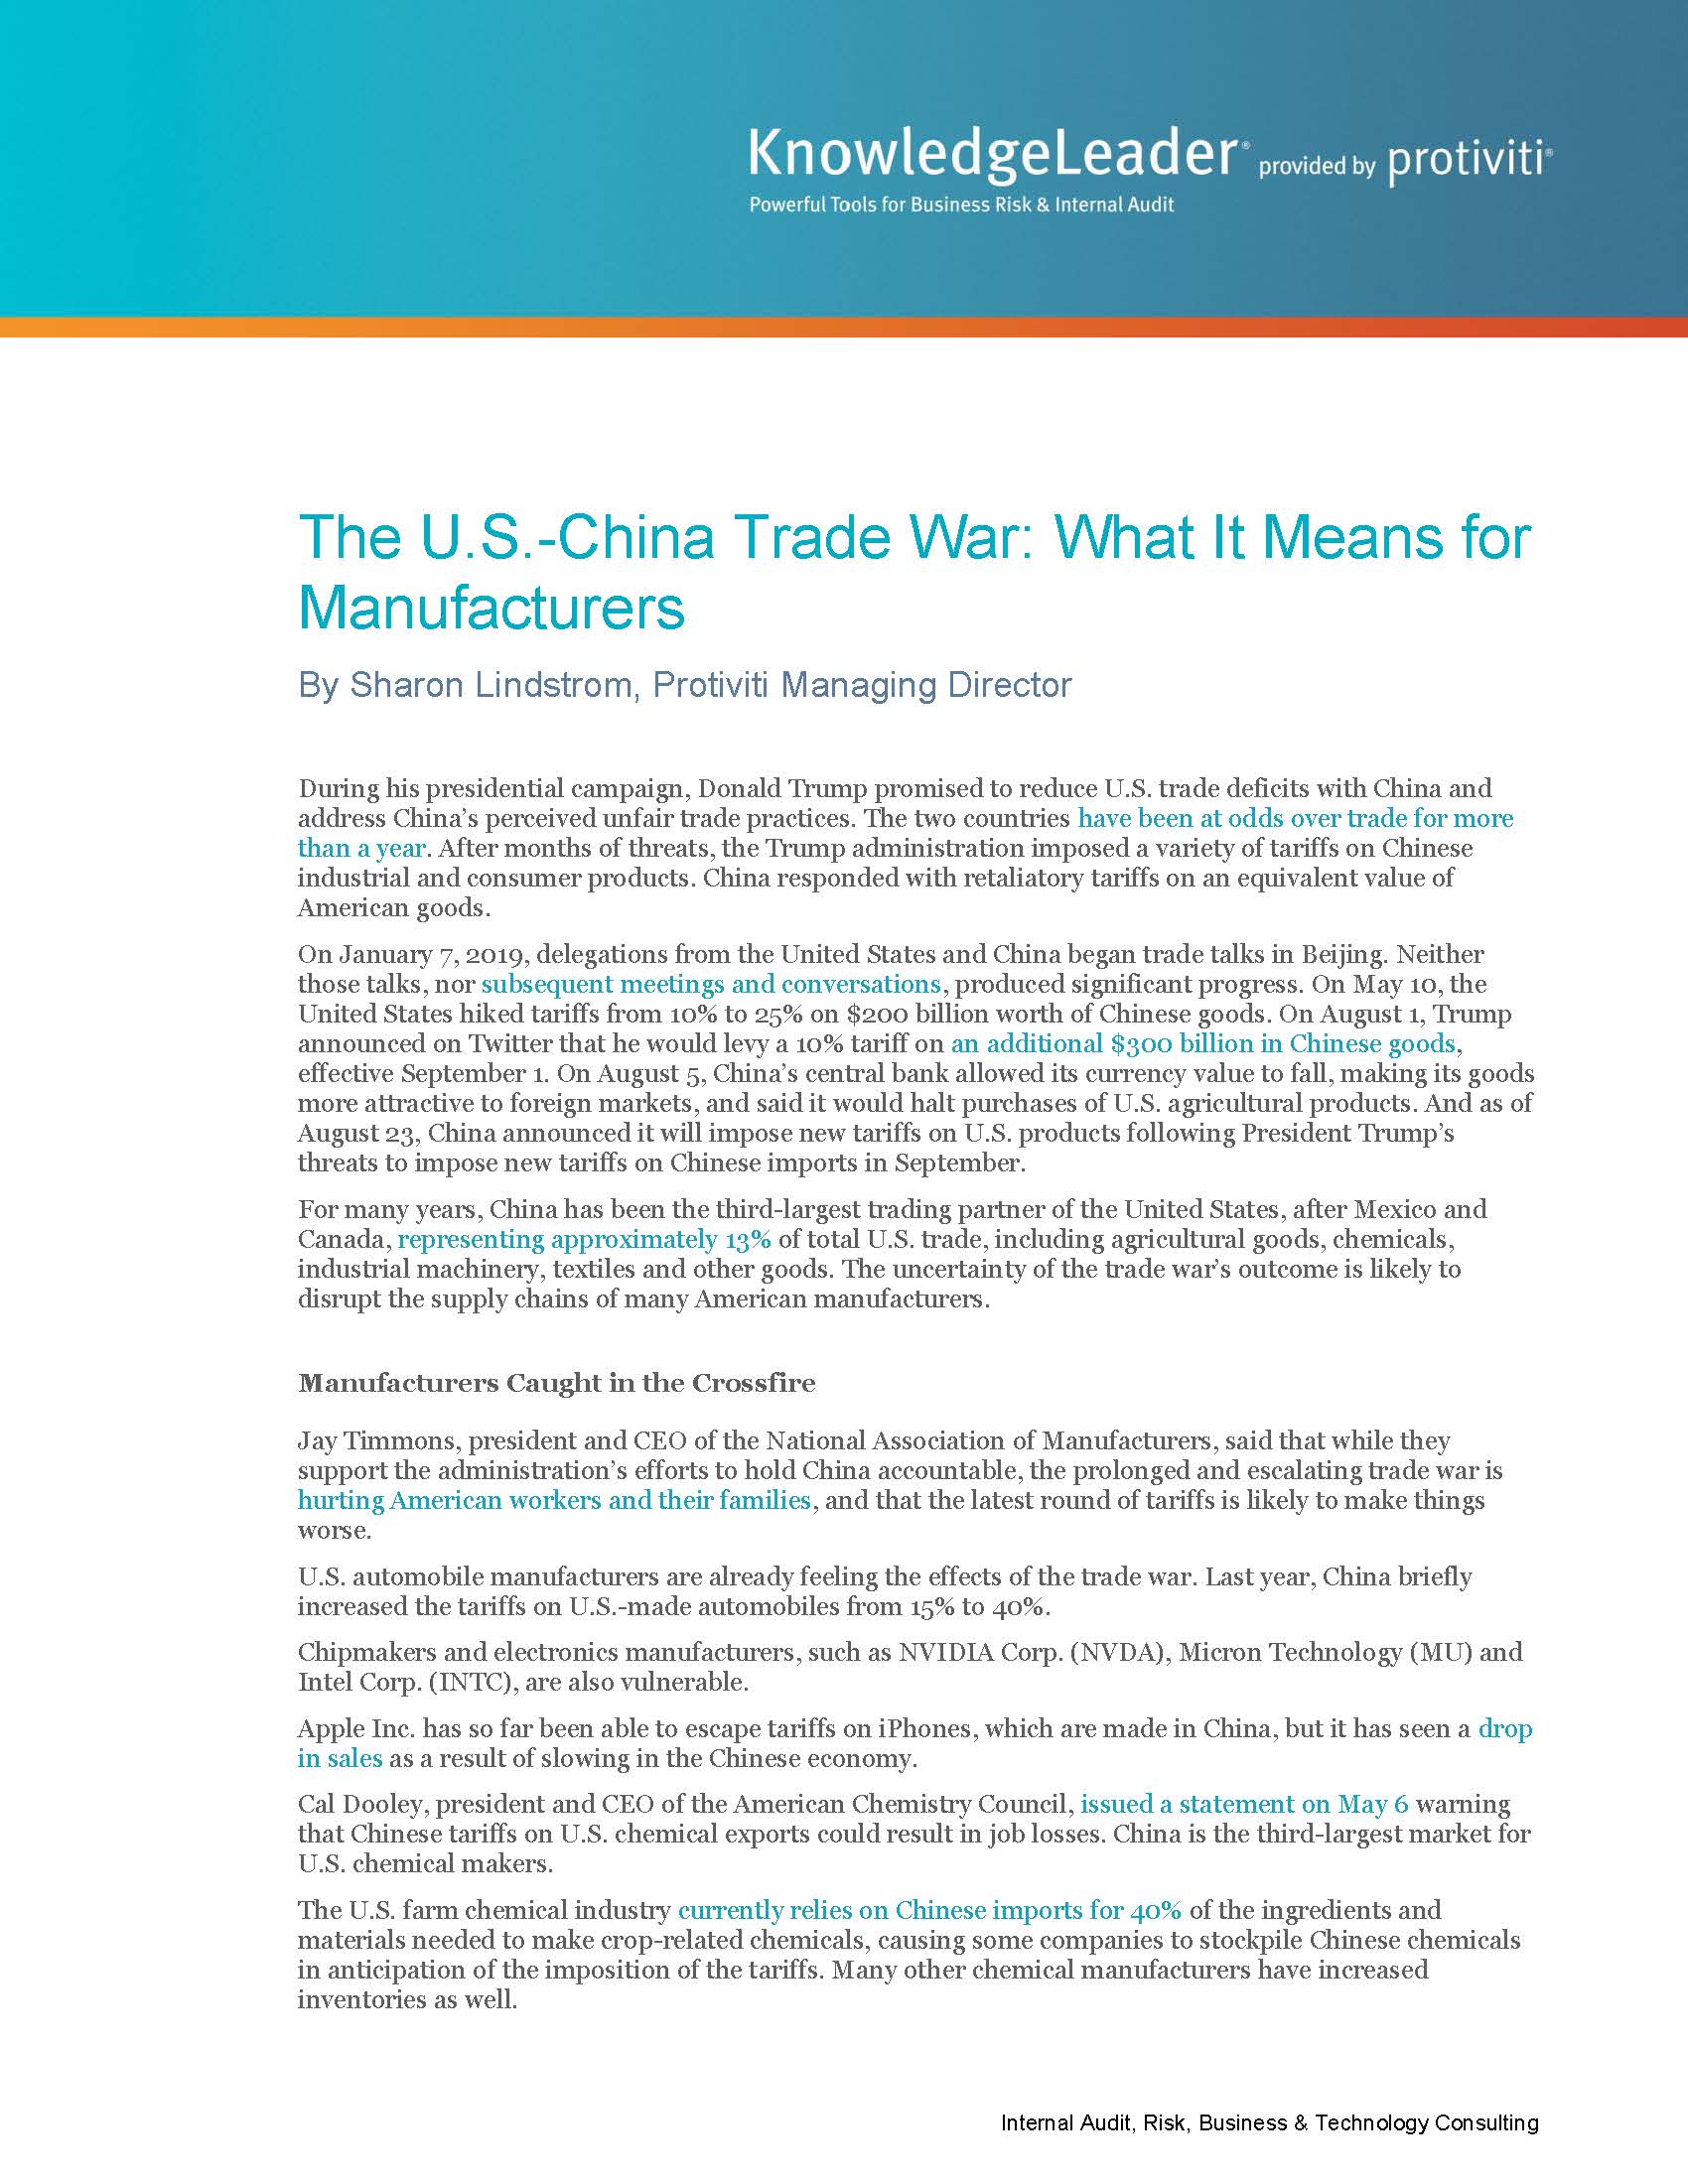 Screenshot of the first page of The U.S.-China Trade War What It Means for Manufacturers